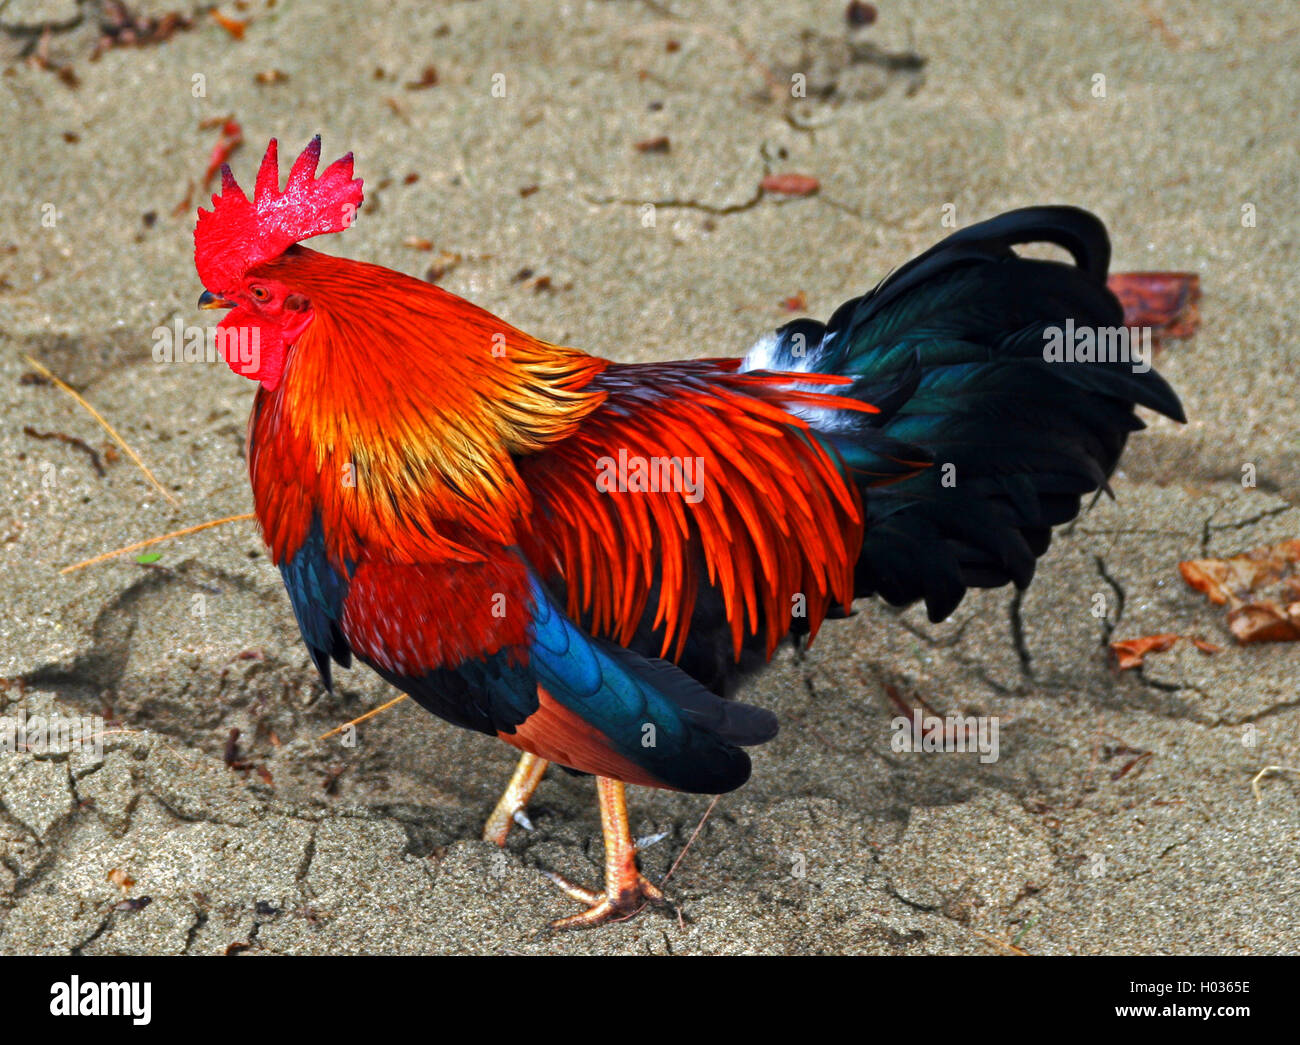 Chicken Rooster with iridescent feathers on beach in Hanalei Bay on Pacific  island of Kauai Hawaii US Stock Photo - Alamy